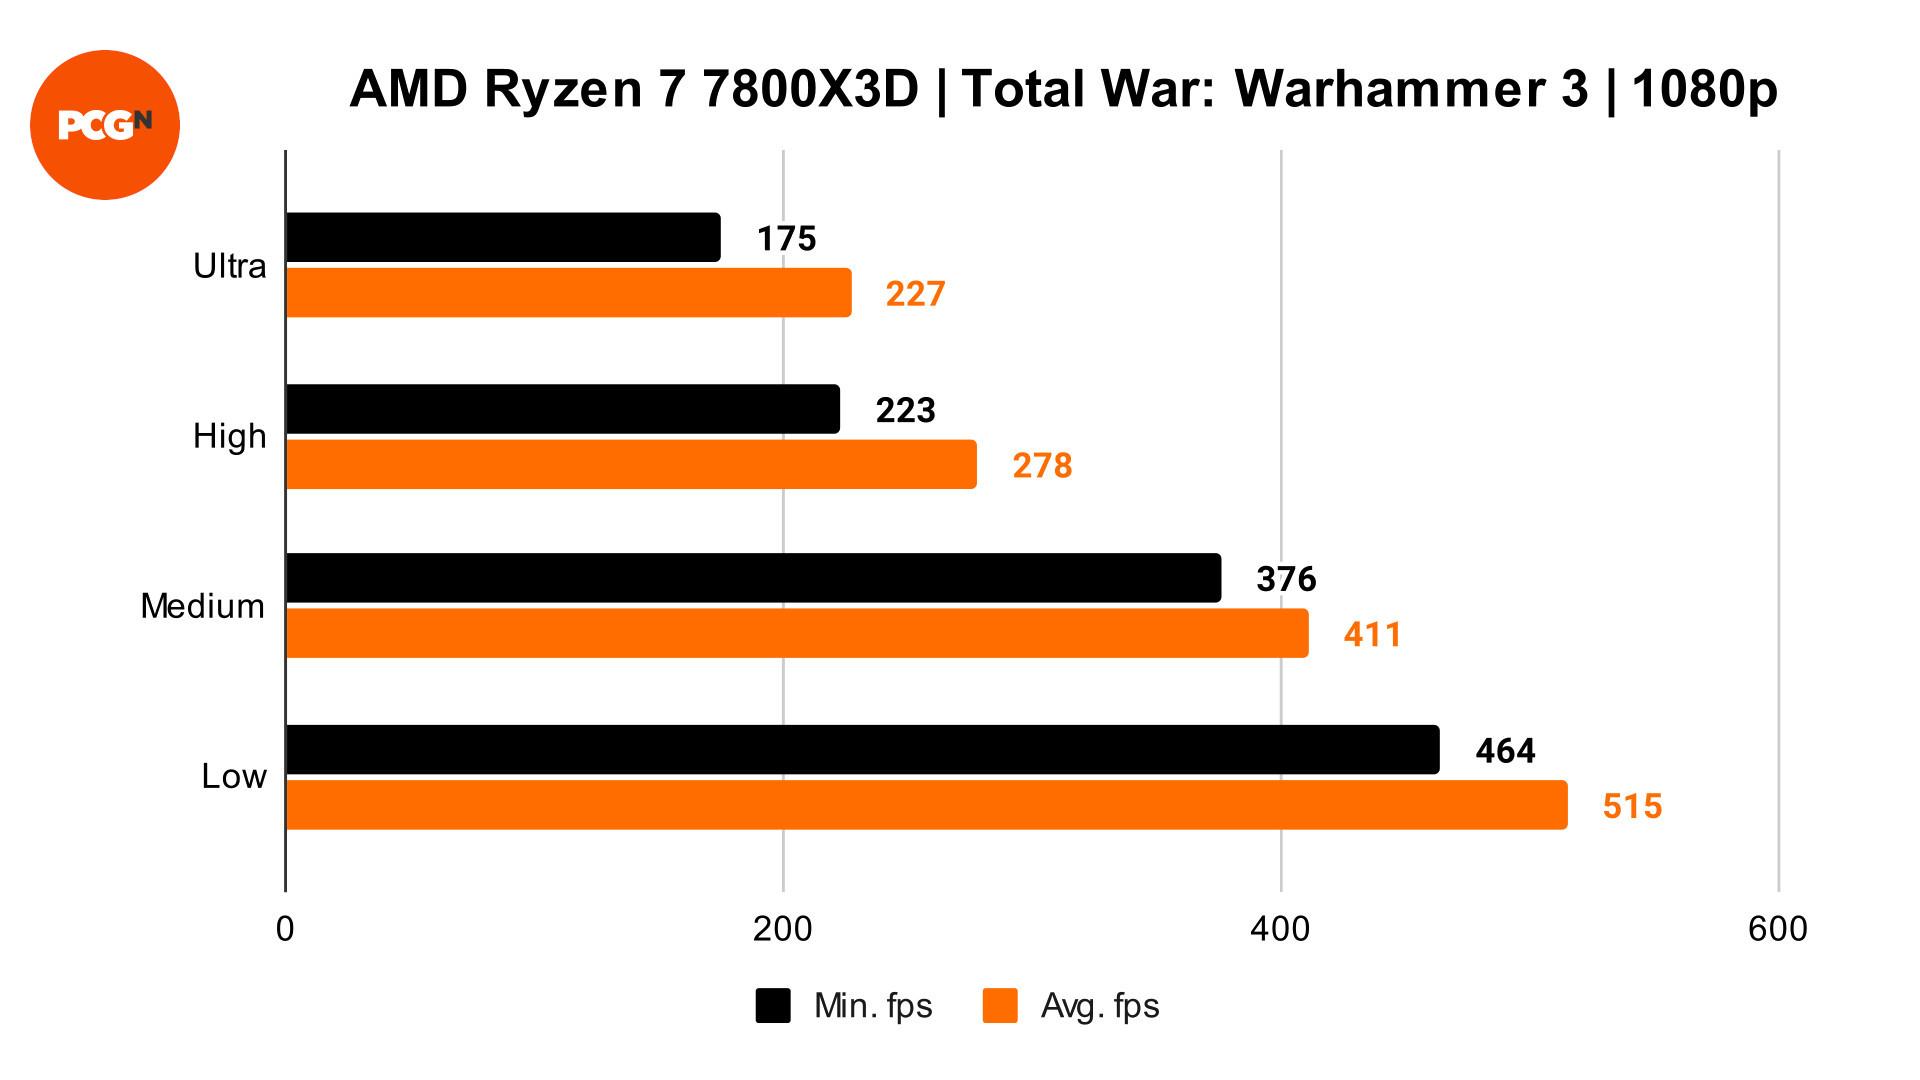 AMD Ryzen 7 7800X3D Gaming Performance Review